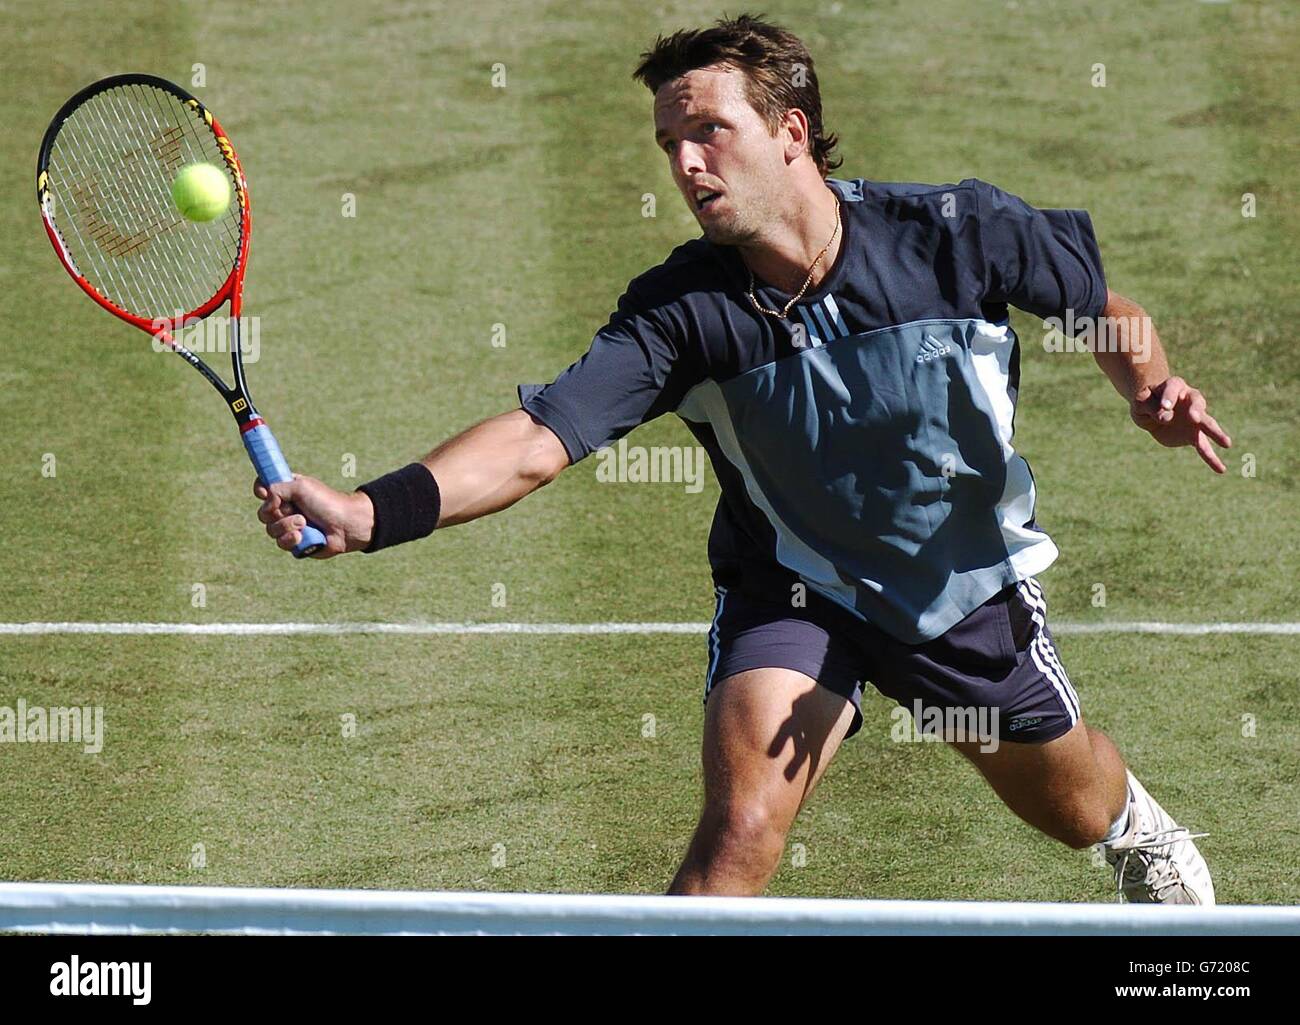 The Nottingham Open Tennis Tournament. Lee Childs of Great Britain plays Hicham Arazi in their first round match at the Nottingham Open tennis tournament. Stock Photo